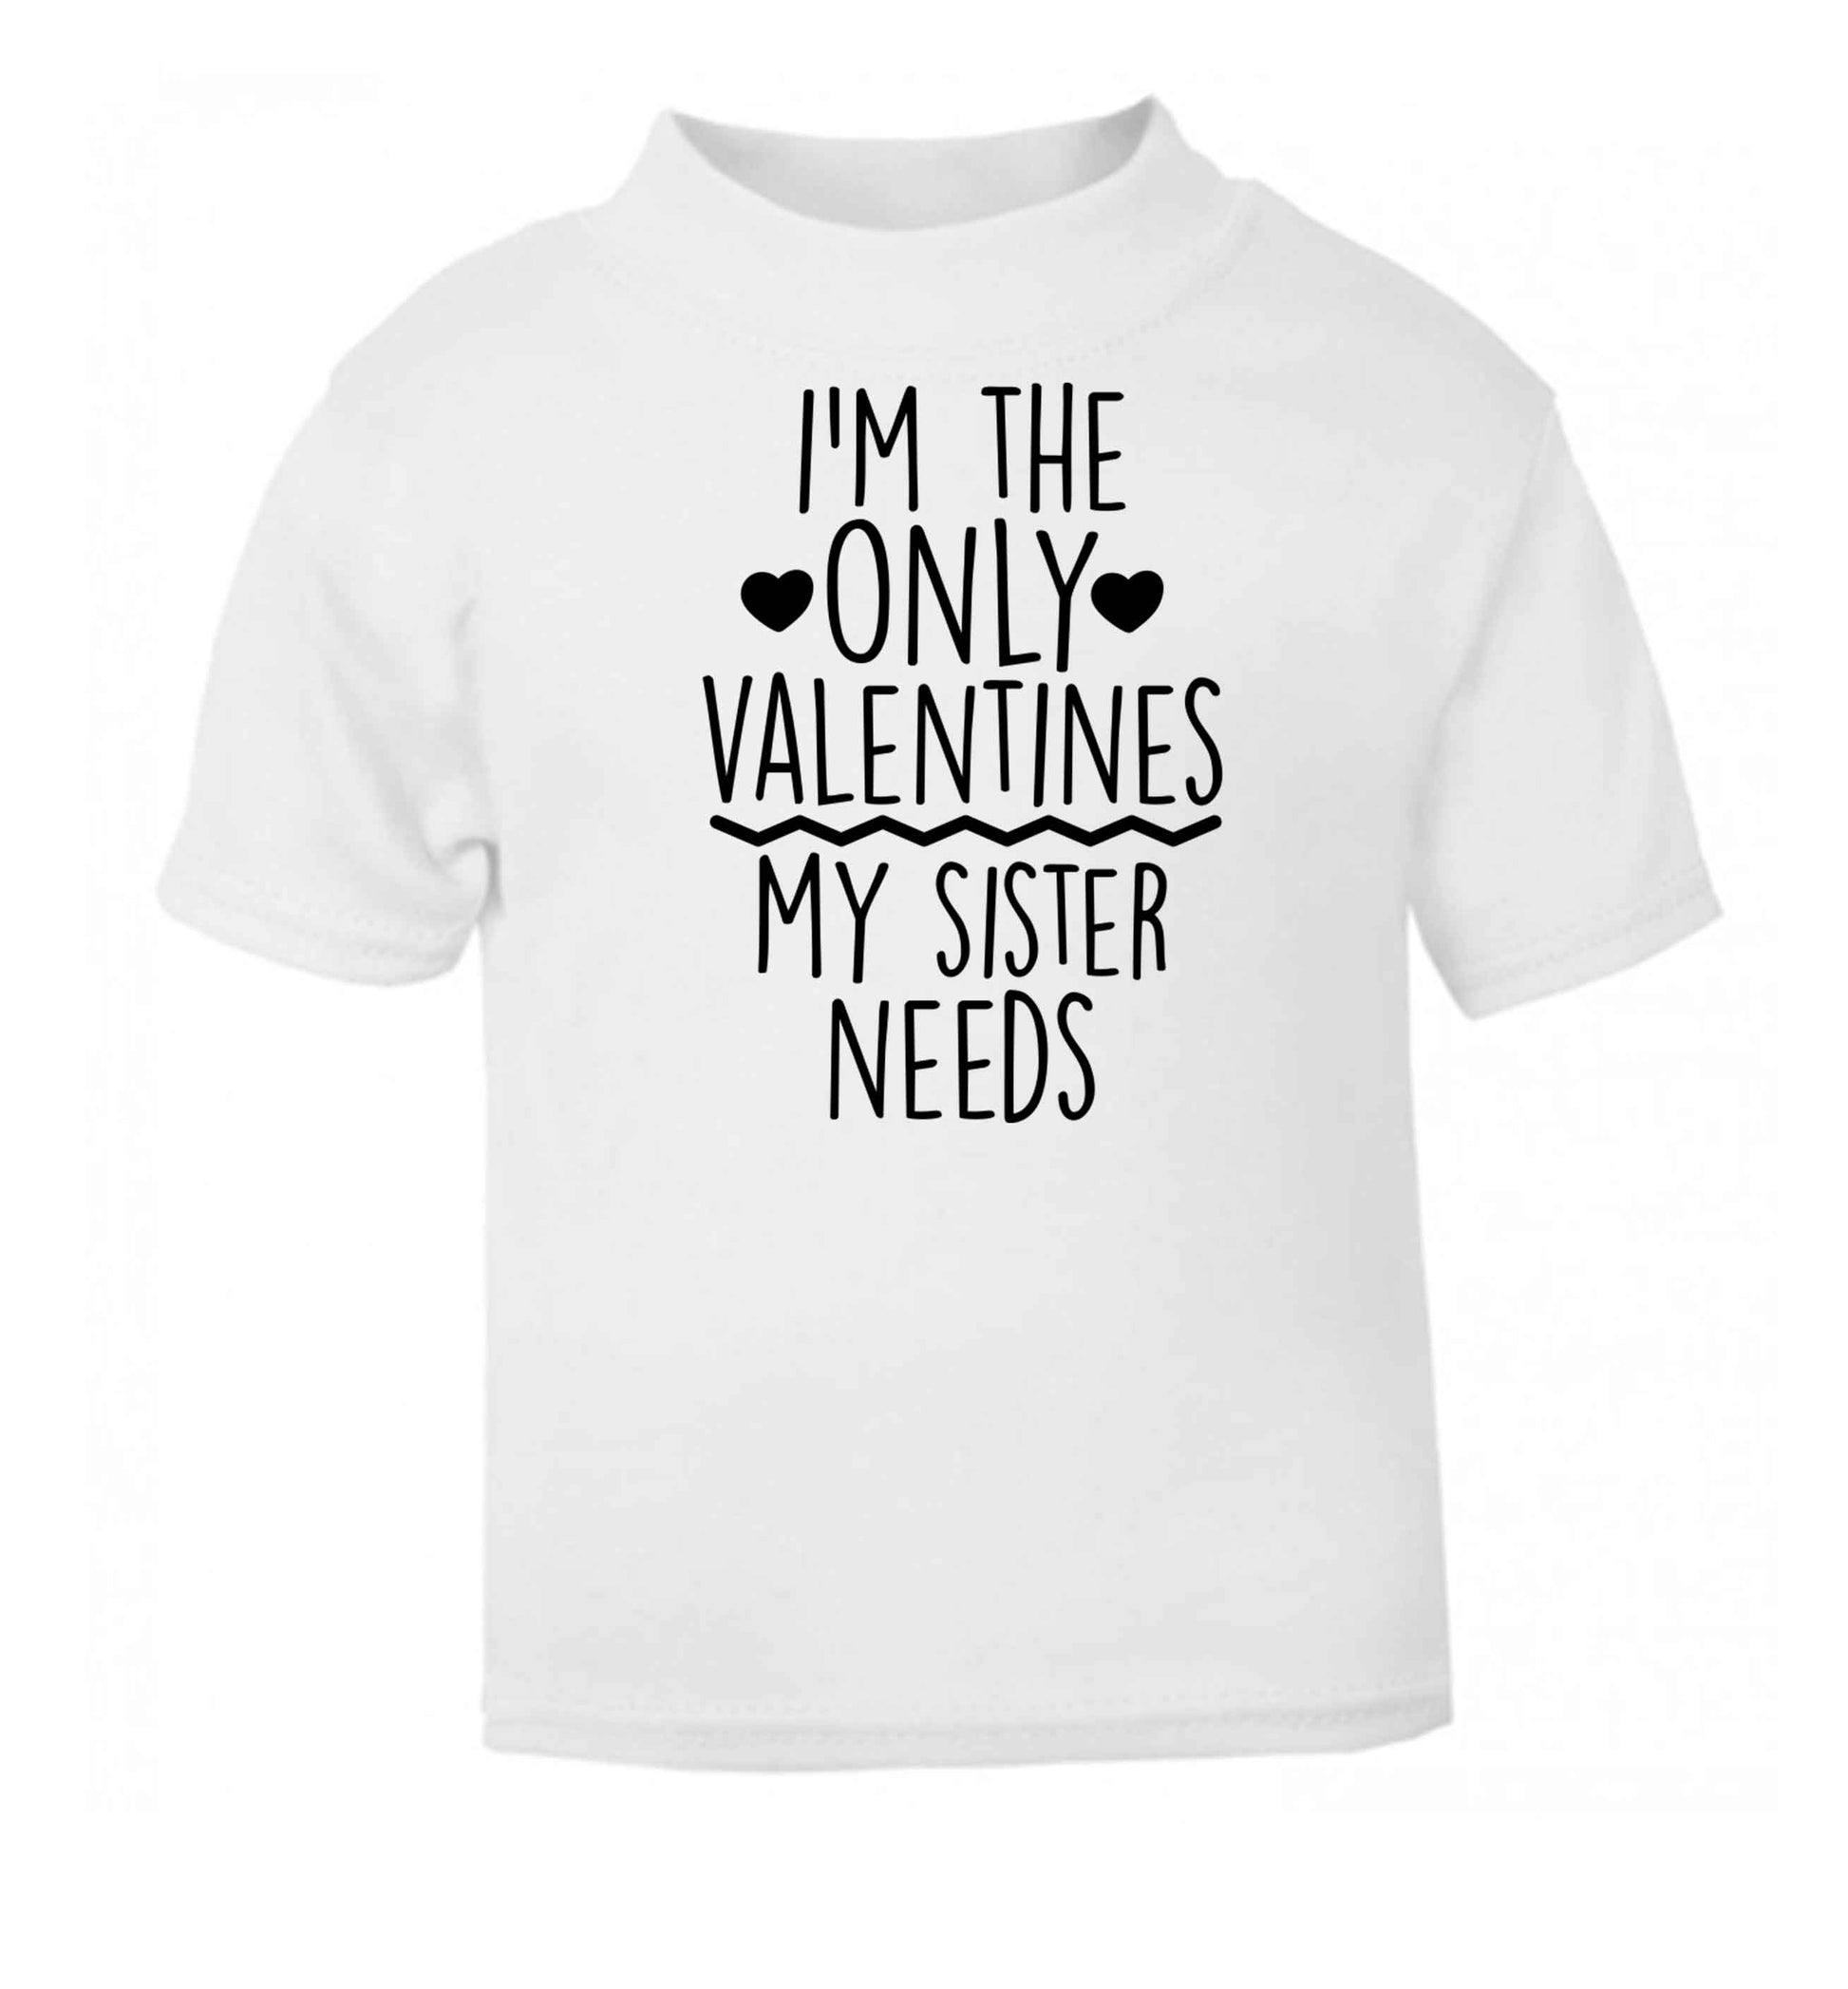 I'm the only valentines my sister needs white baby toddler Tshirt 2 Years